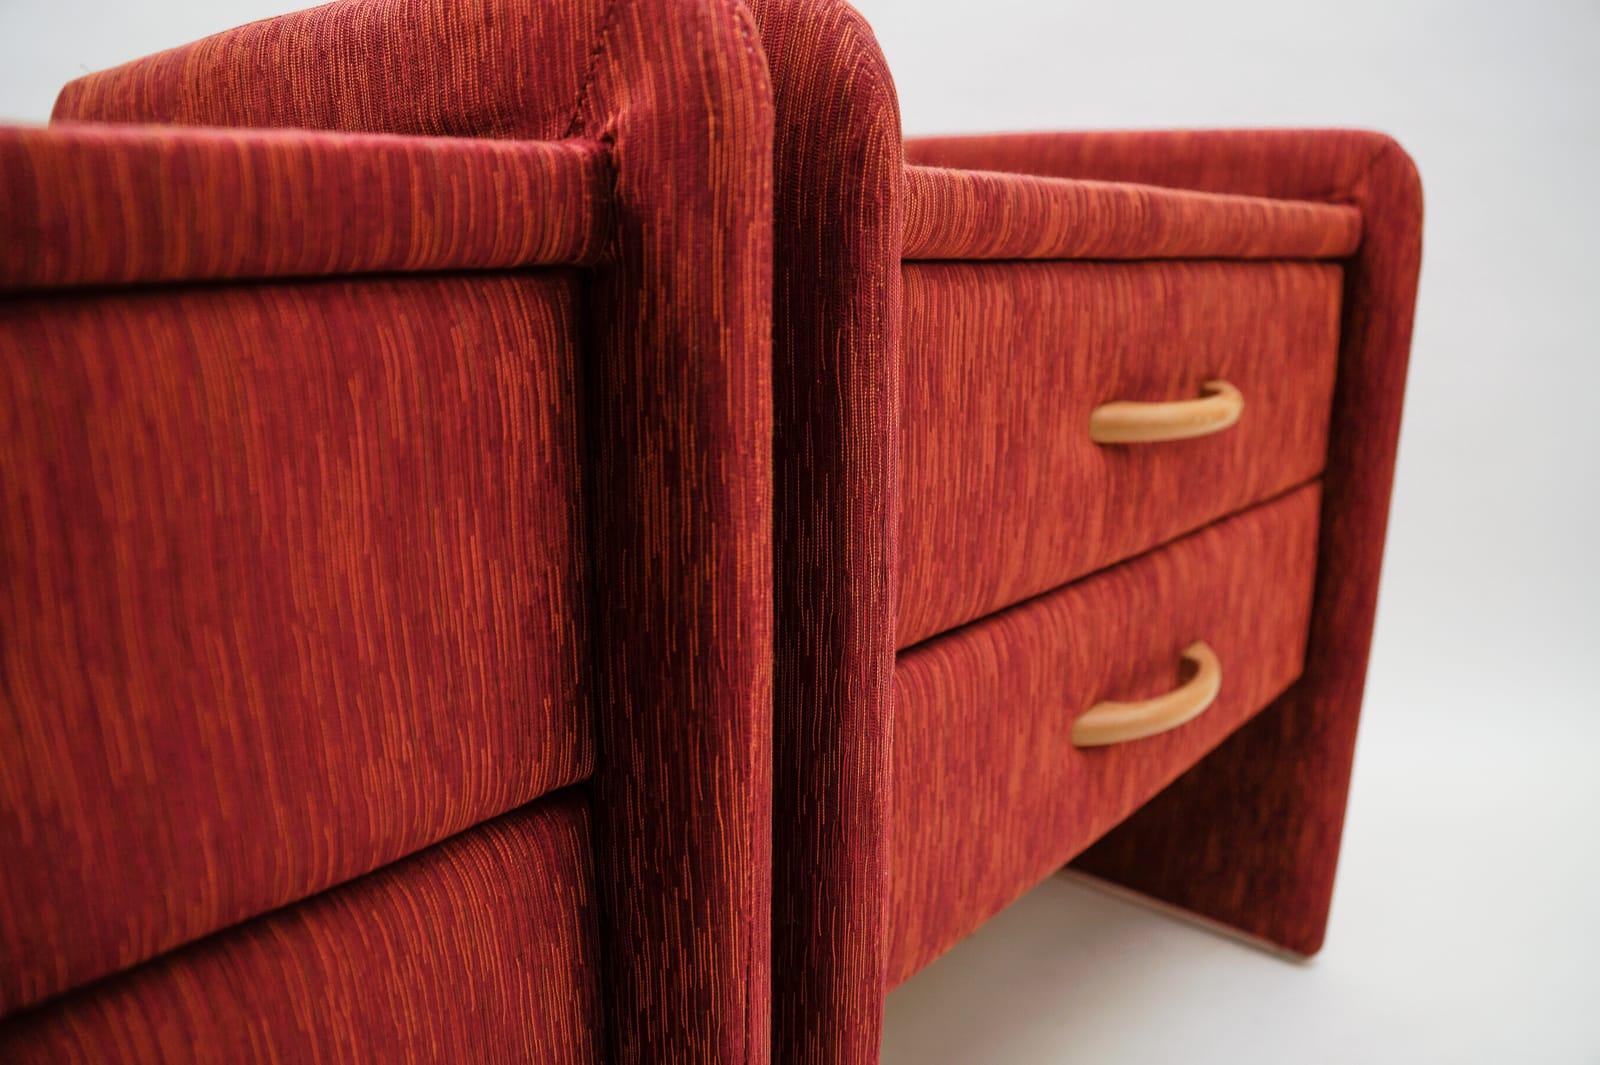 Wood Two Fabric Upholstered Bedside Cabinets in Light Cherry Red and Glass, 1980s For Sale